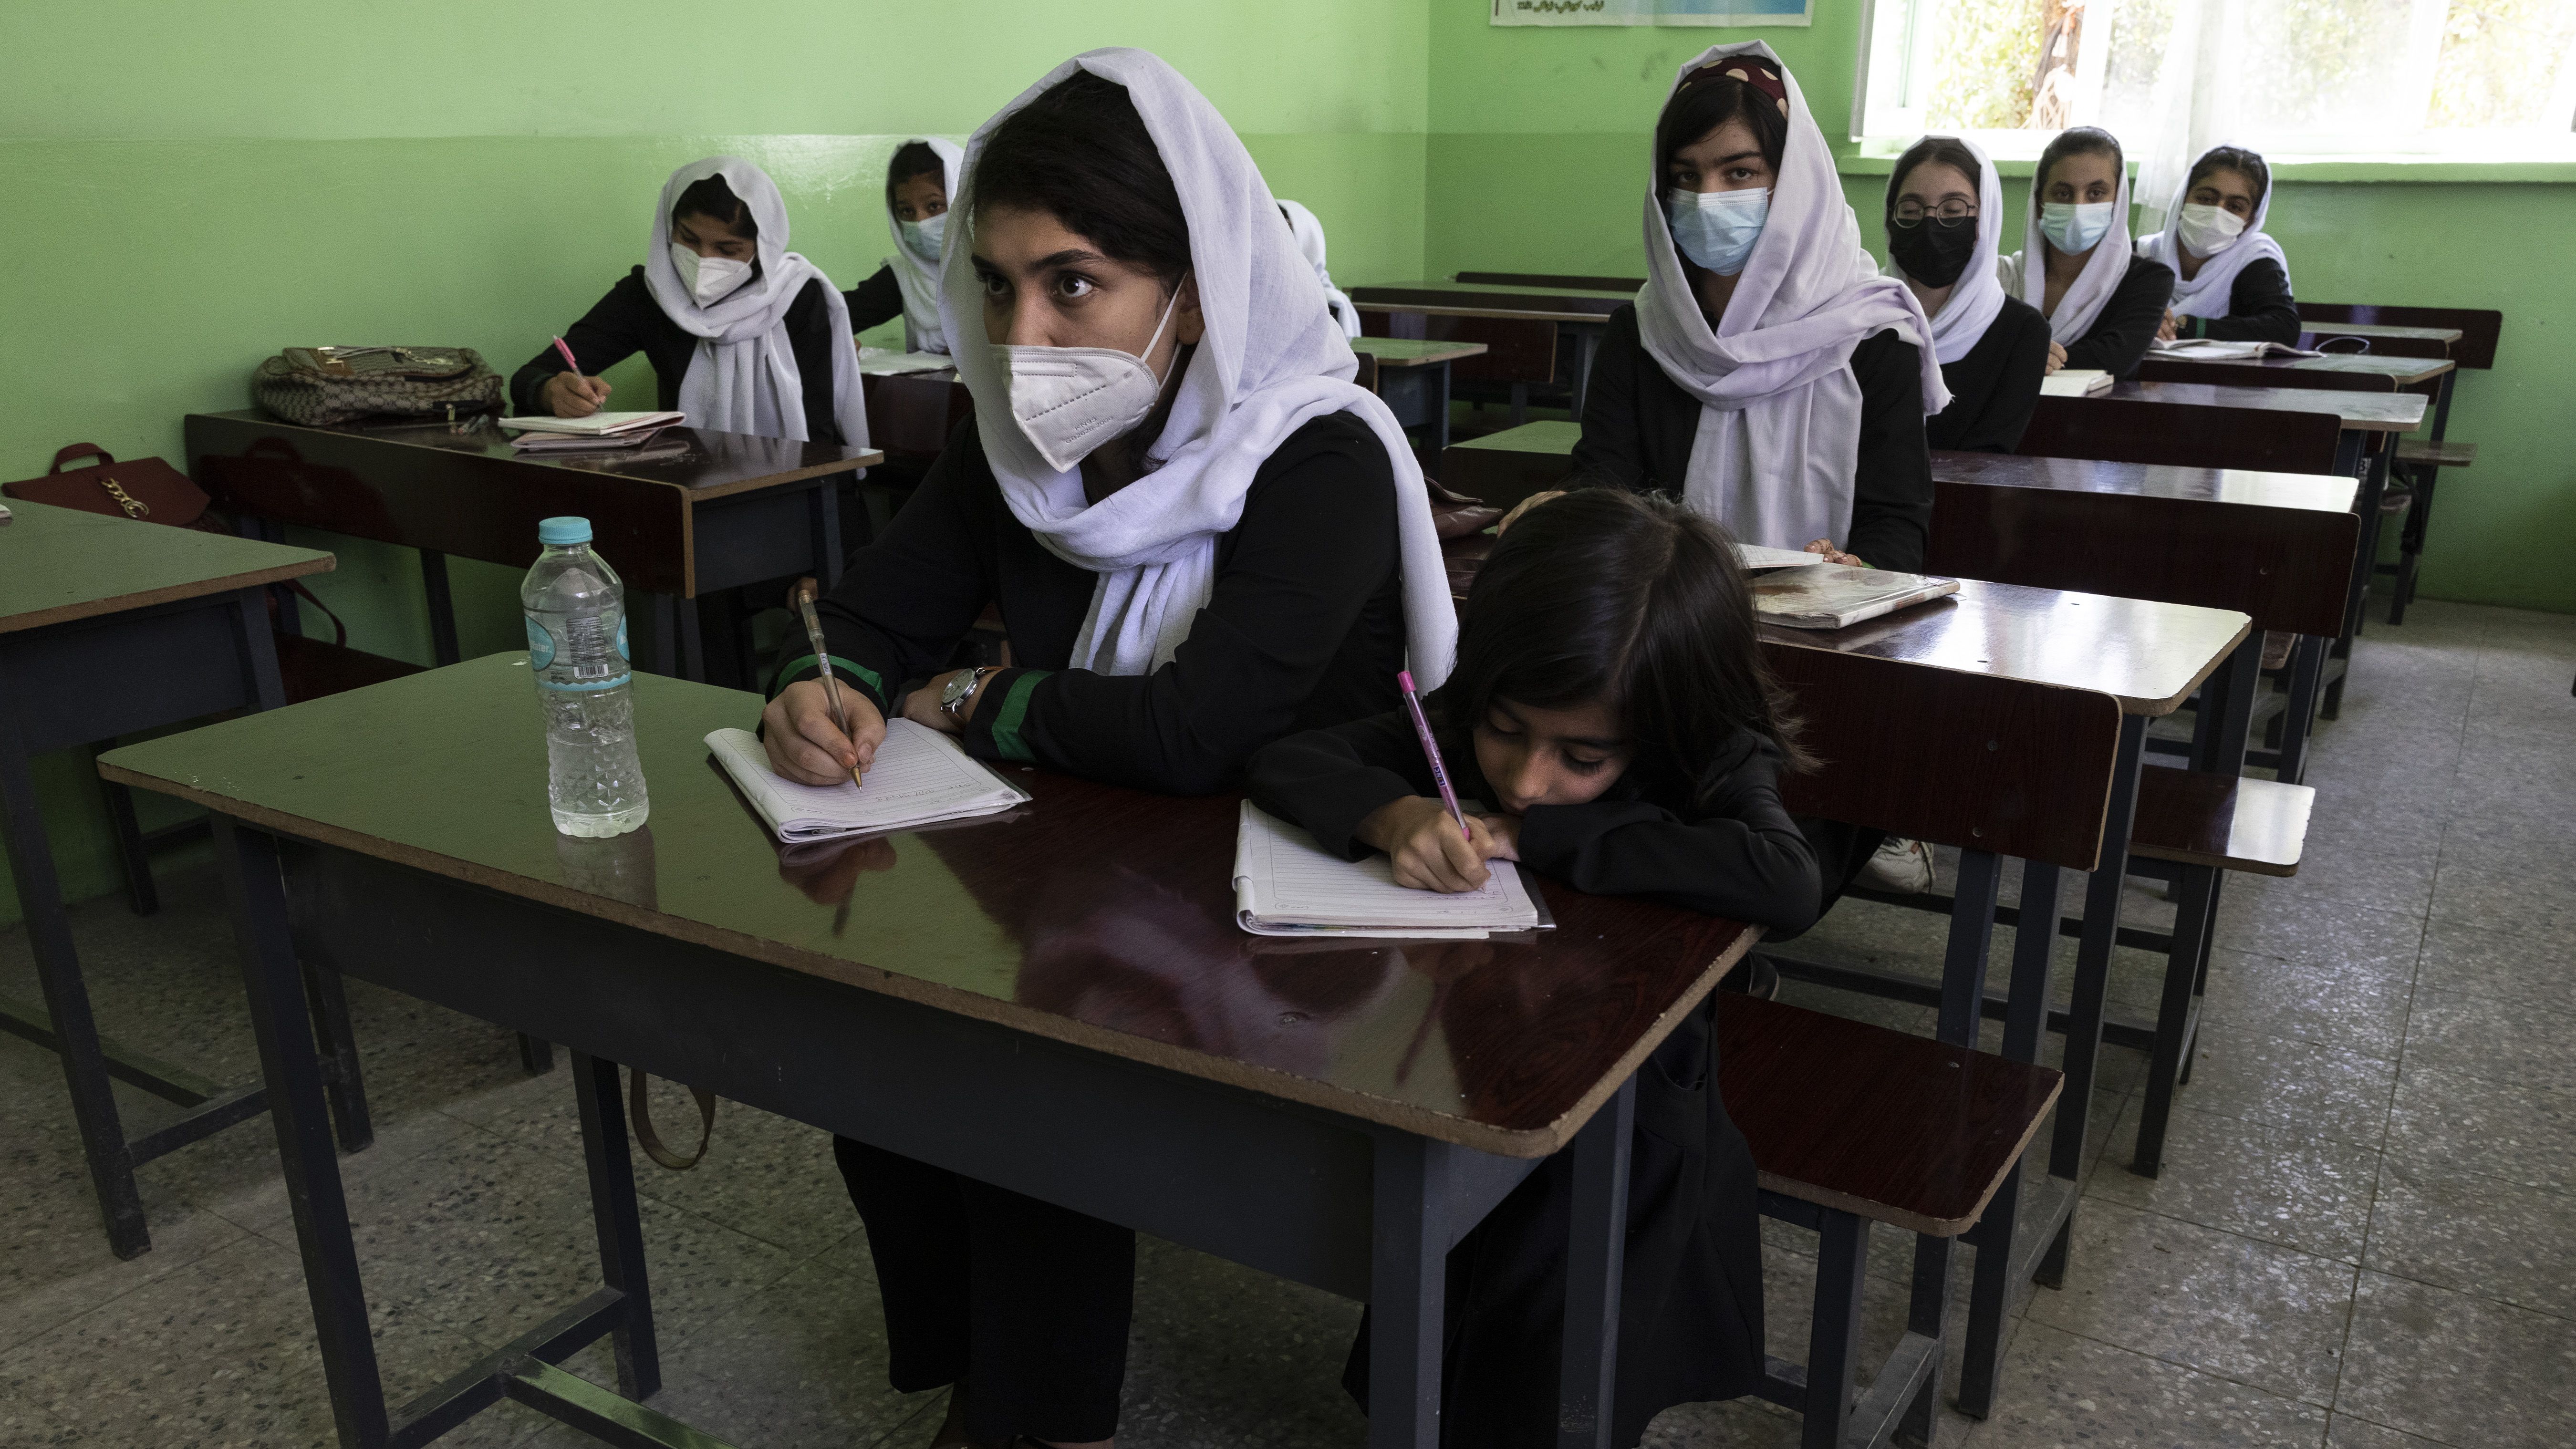 Girls have sex at school in Kabul